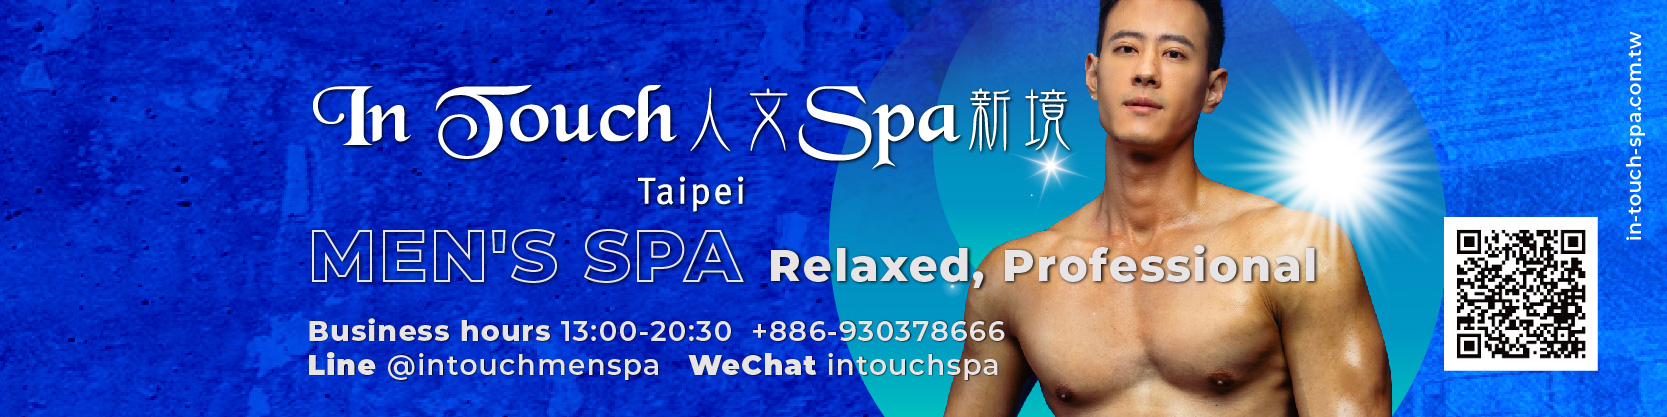 In Touch Spa